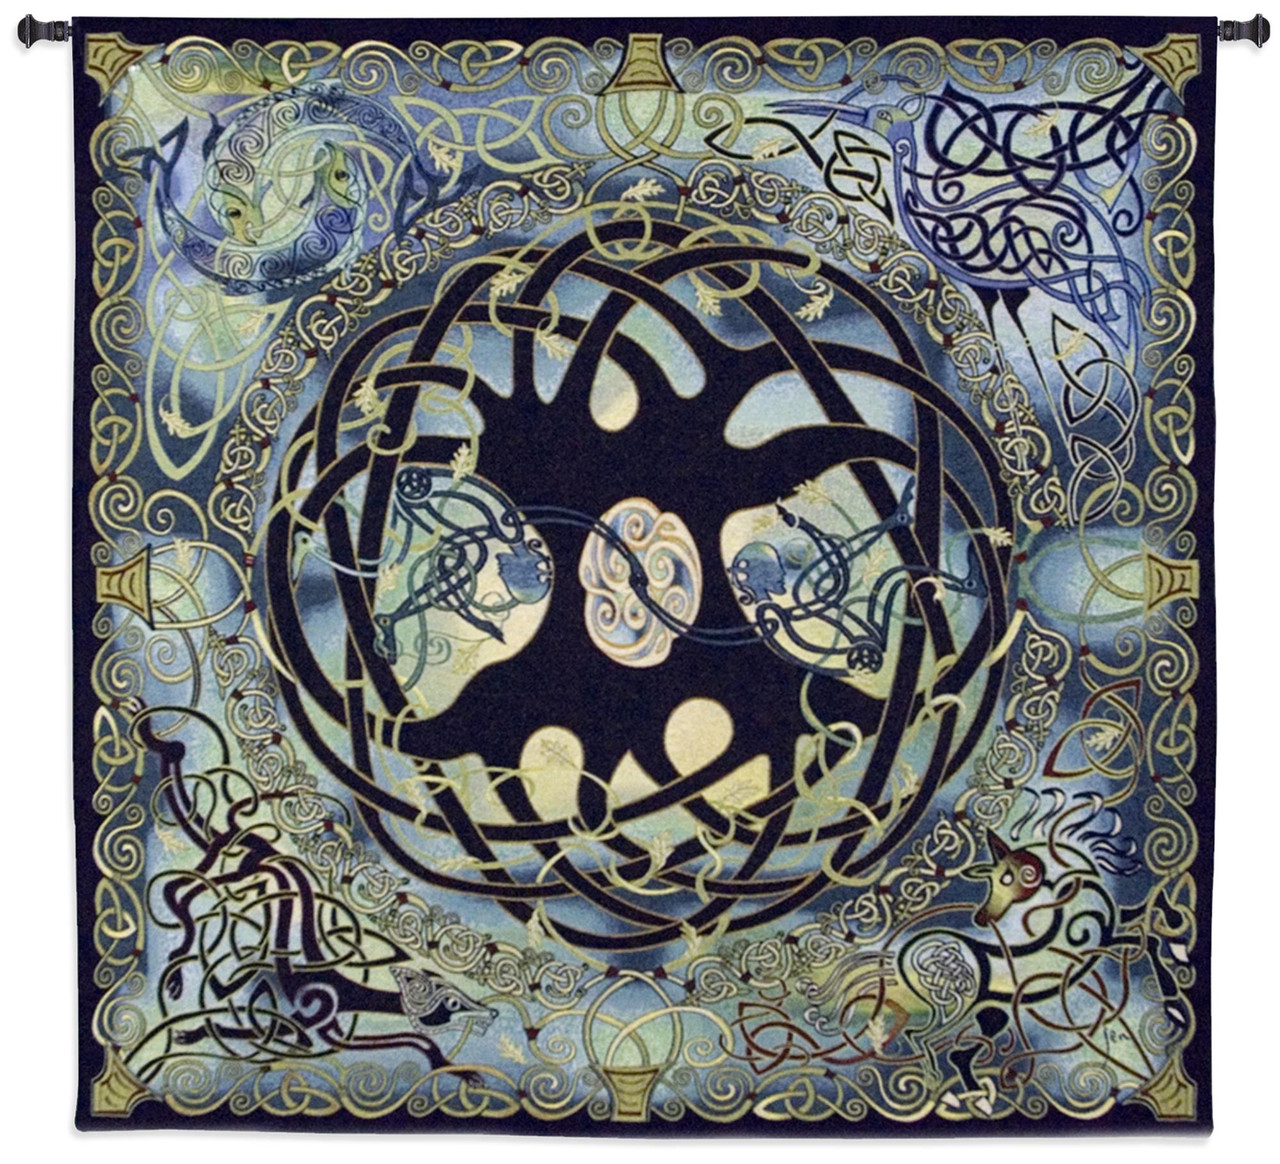 Celtic Tree of Life by Jan Delyth Woven Tapestry Wall Art Hanging  Spiritual Celtic Pattern 100% Cotton USA Size 52x51